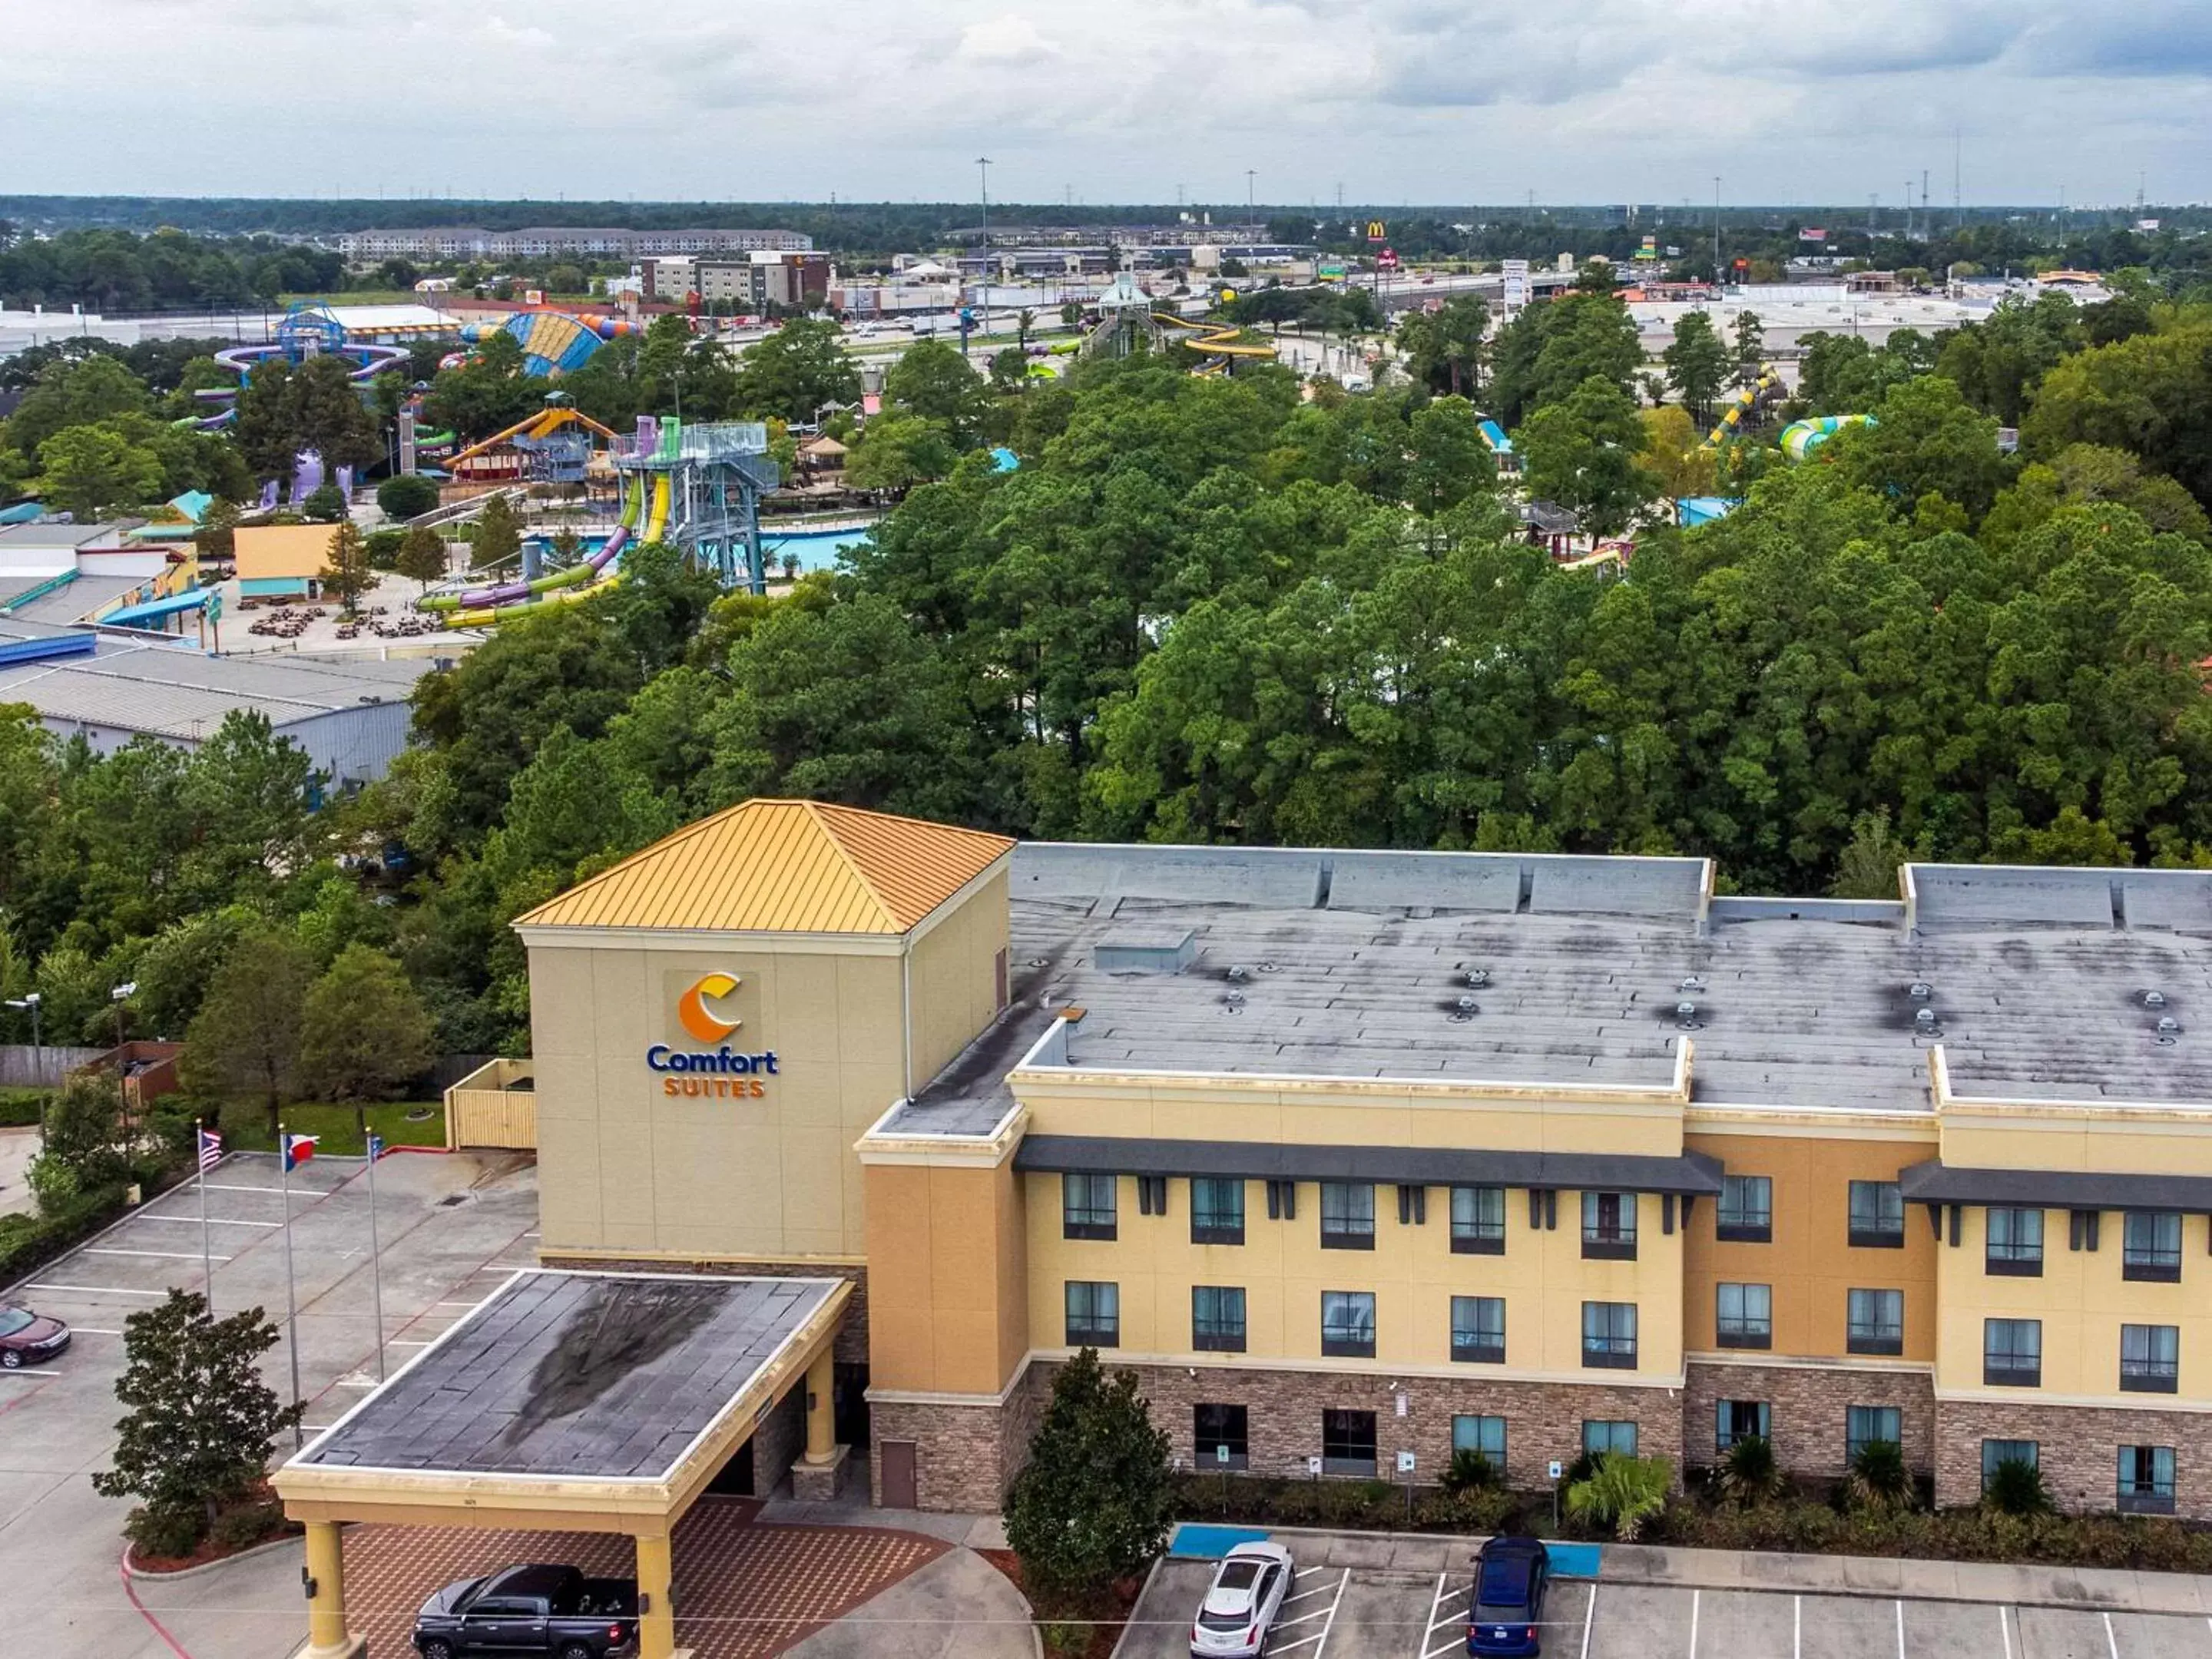 Property building, Bird's-eye View in Comfort Suites Old Town Spring